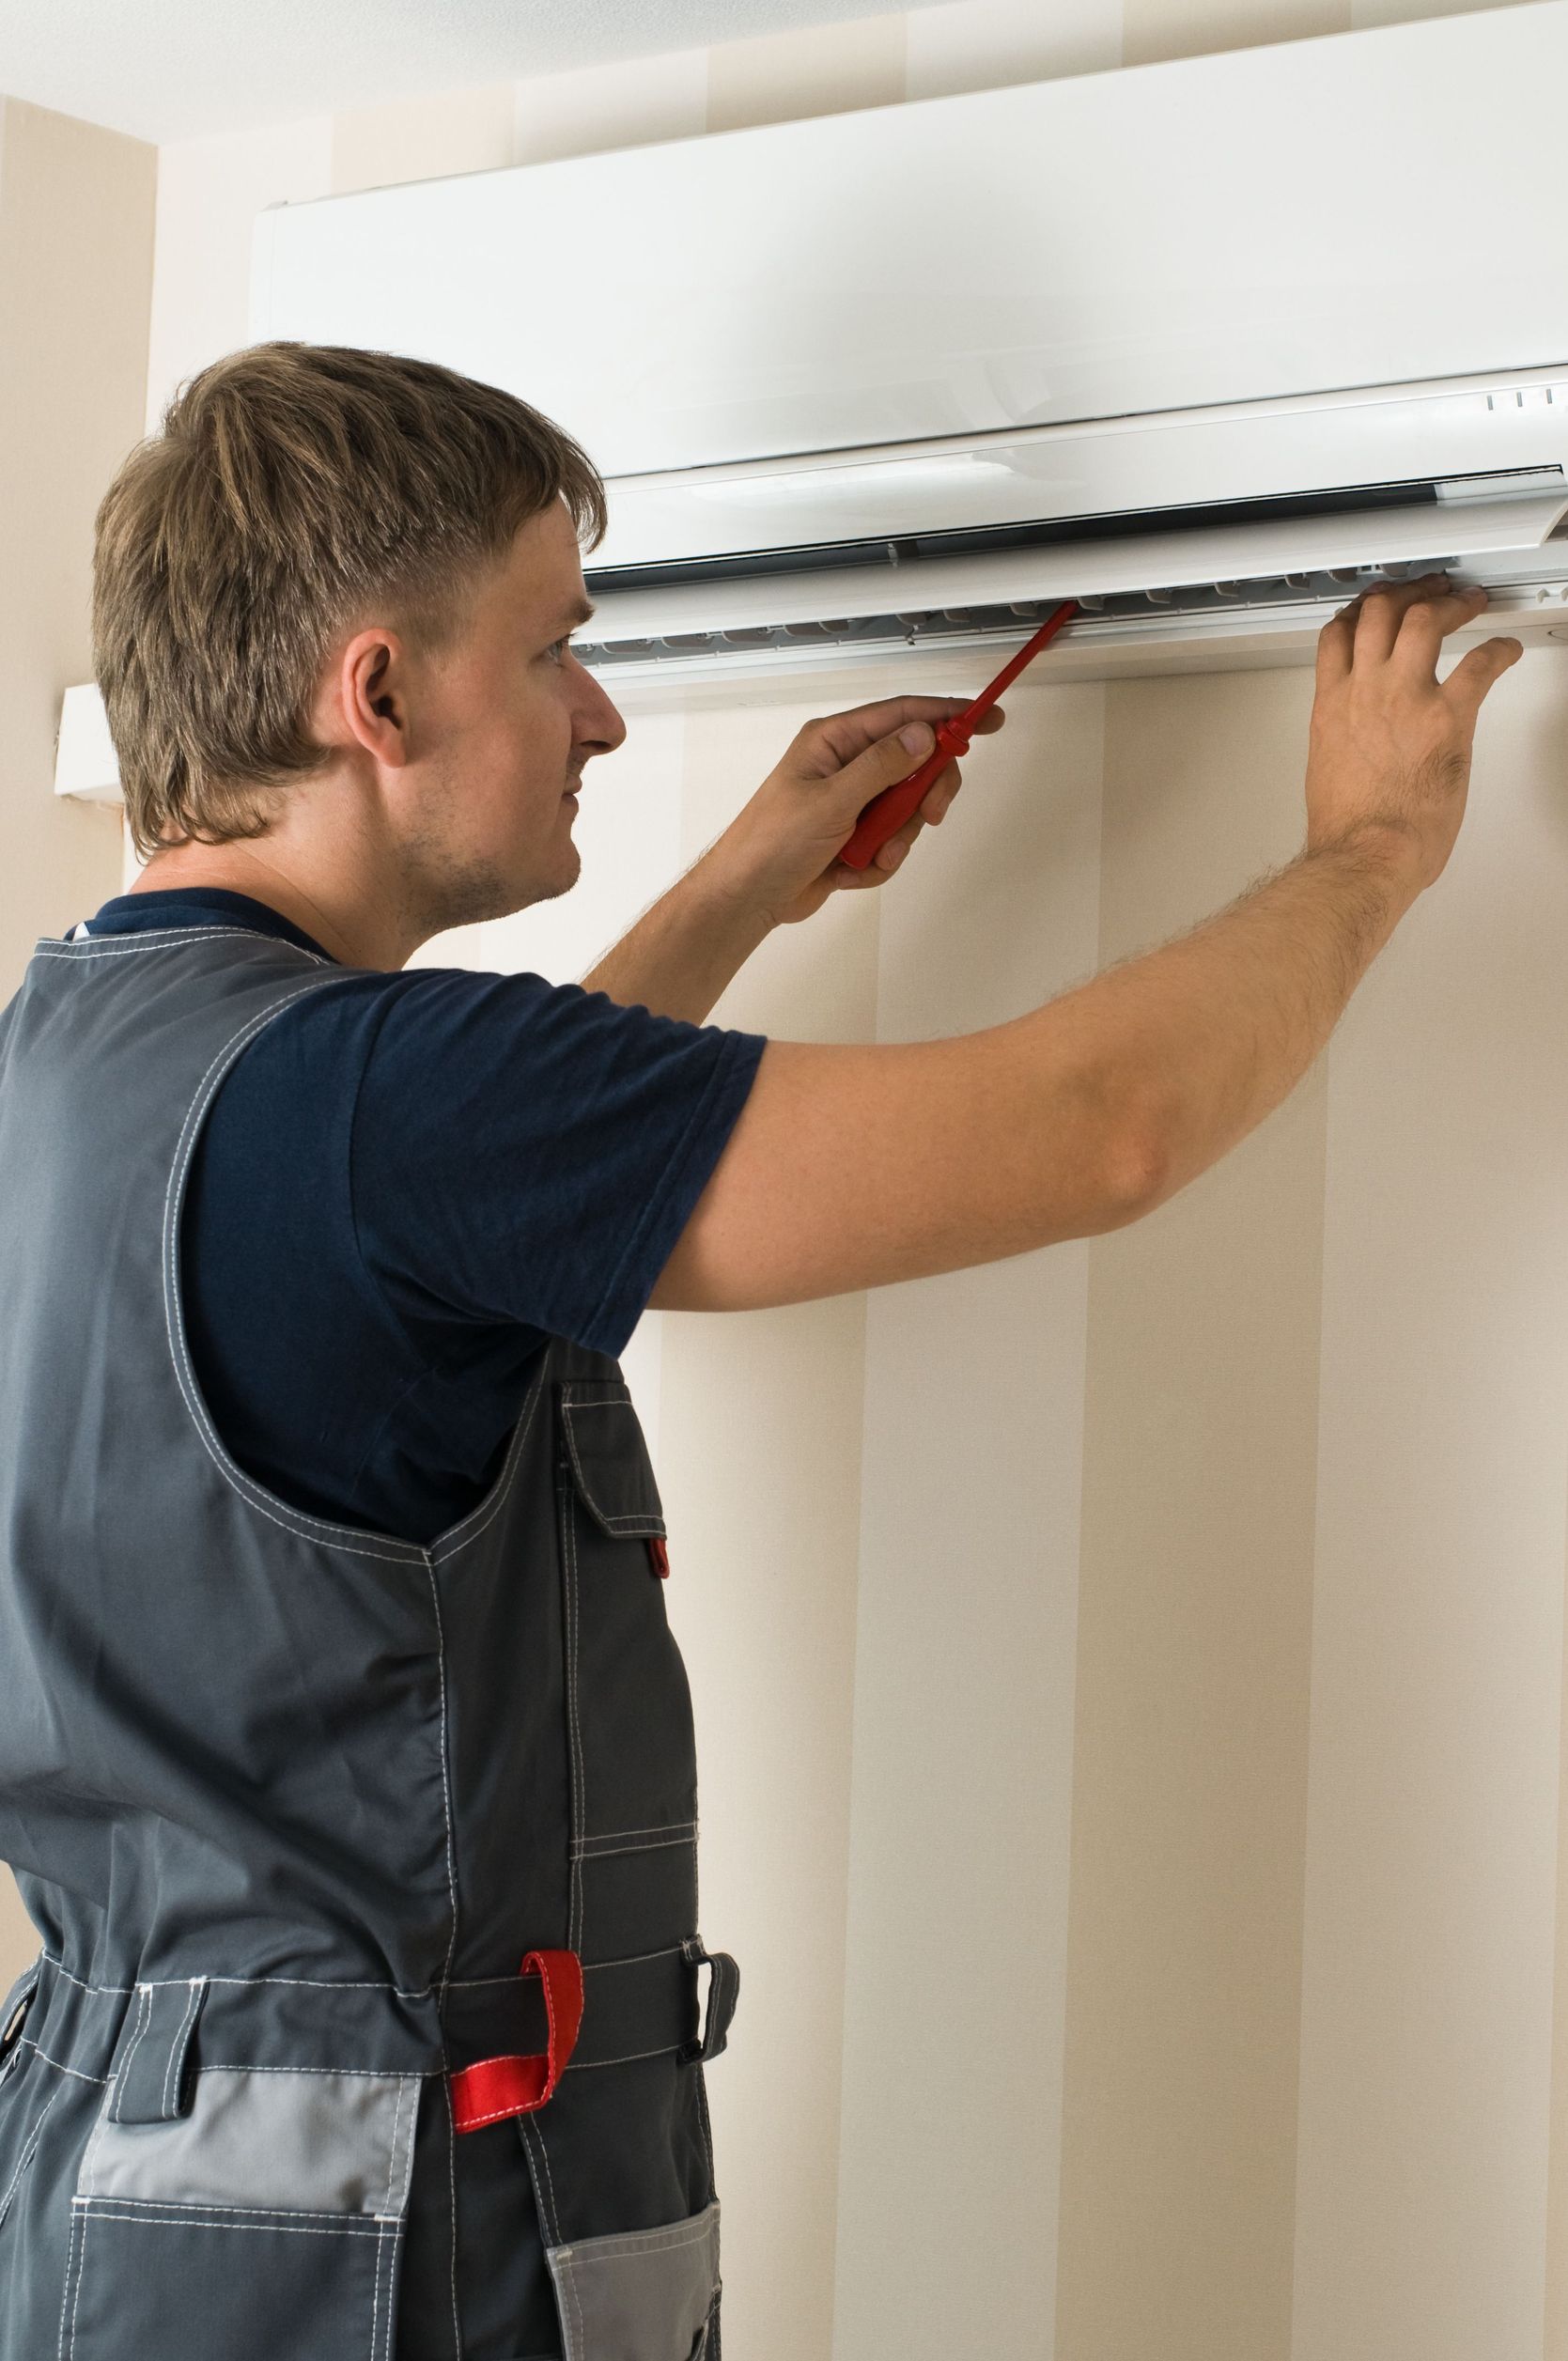 Why Hire a Residential Air Conditioning Contractor in Estero, FL?